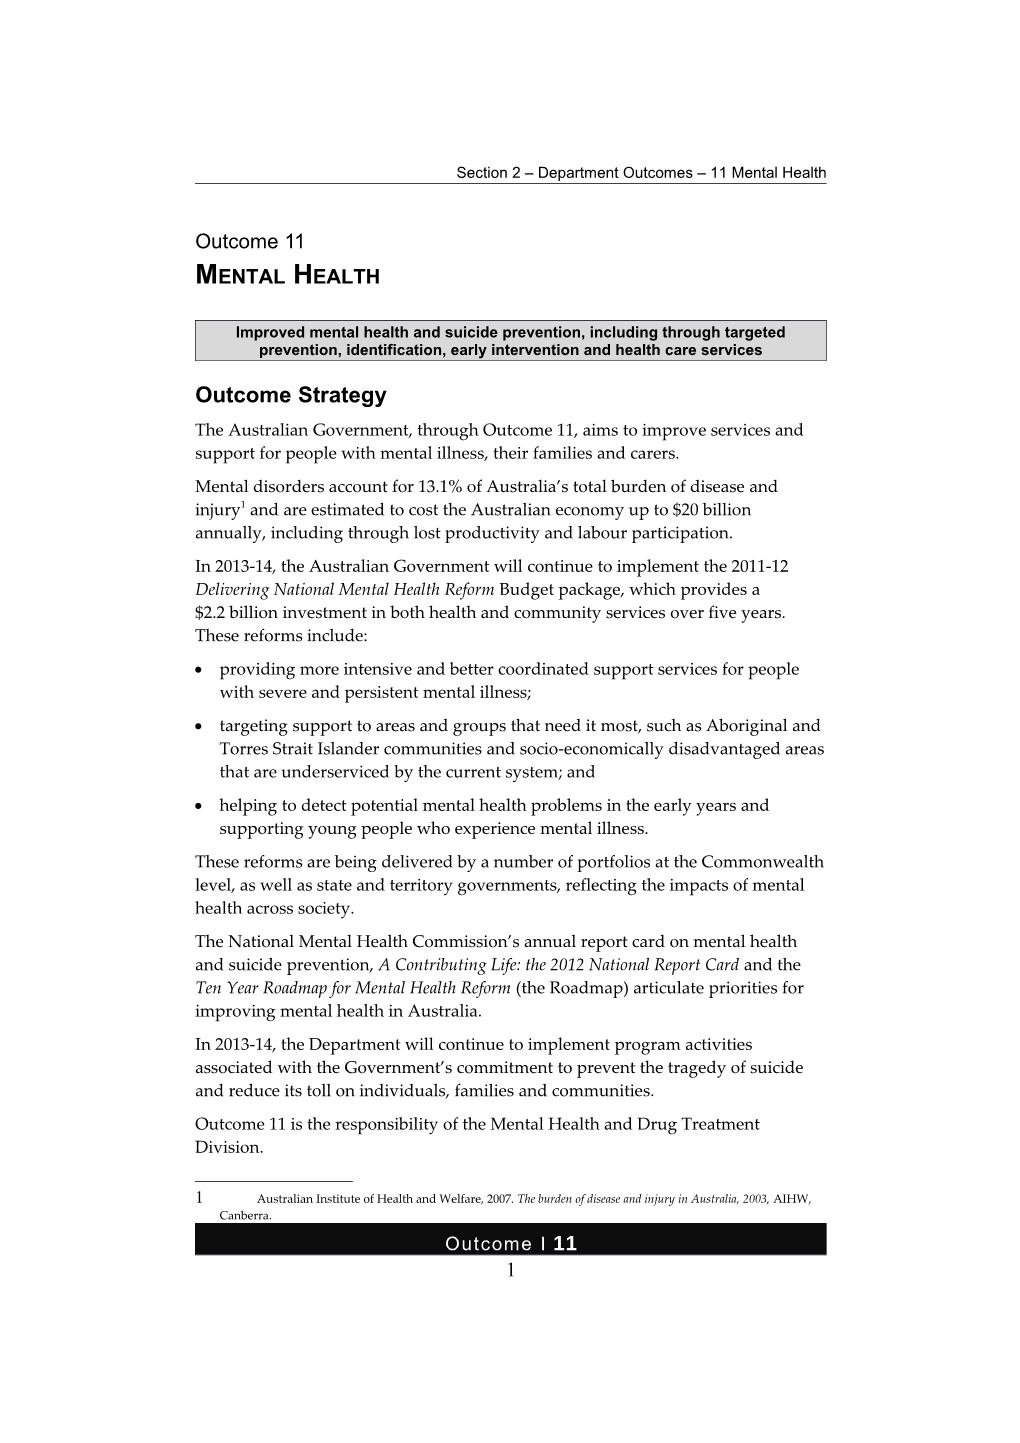 Section 2 Department Outcomes 11 Mental Health